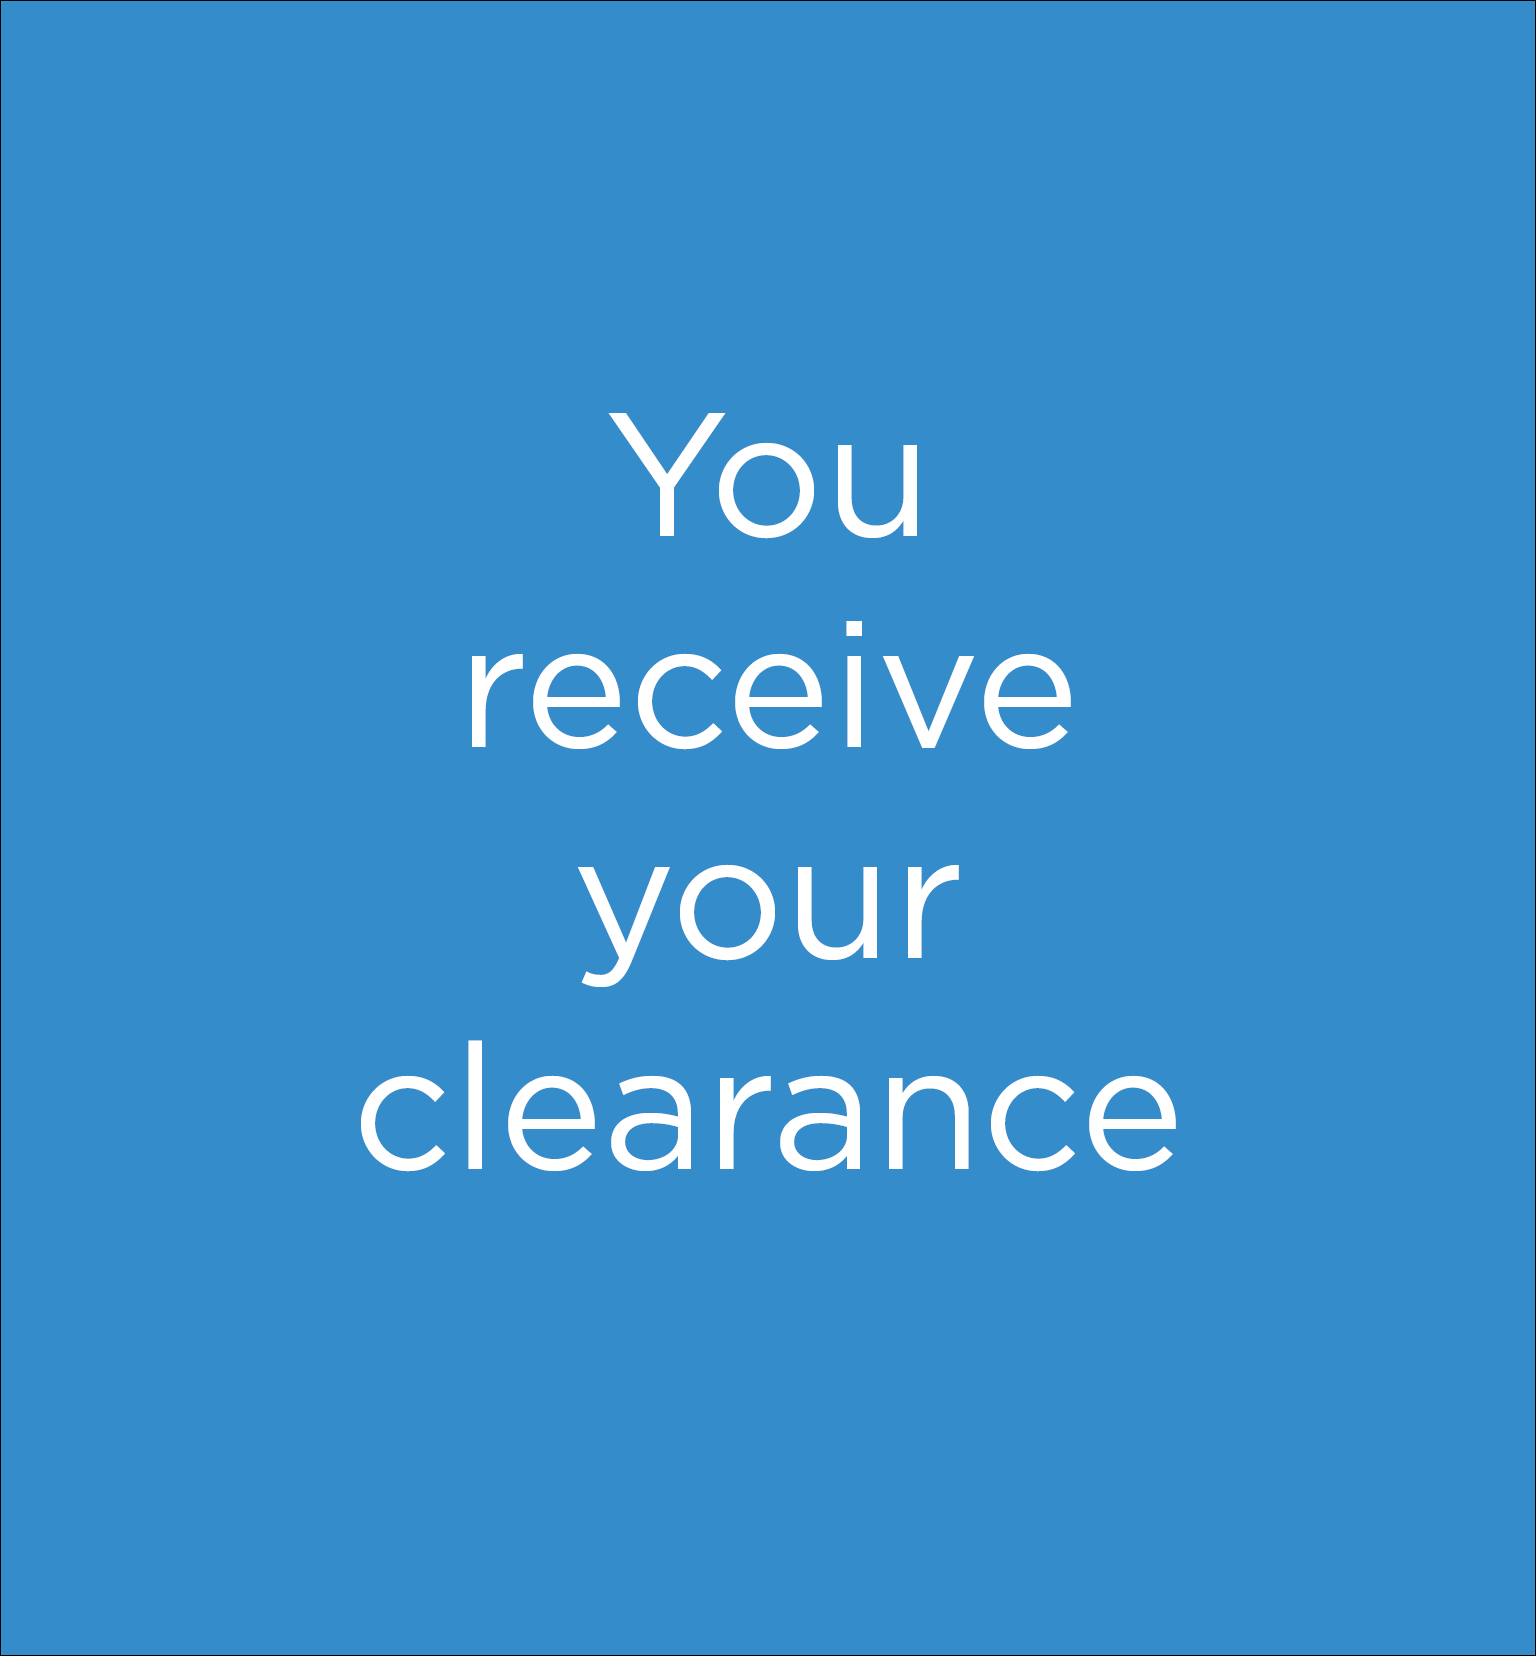 You receive your clearance